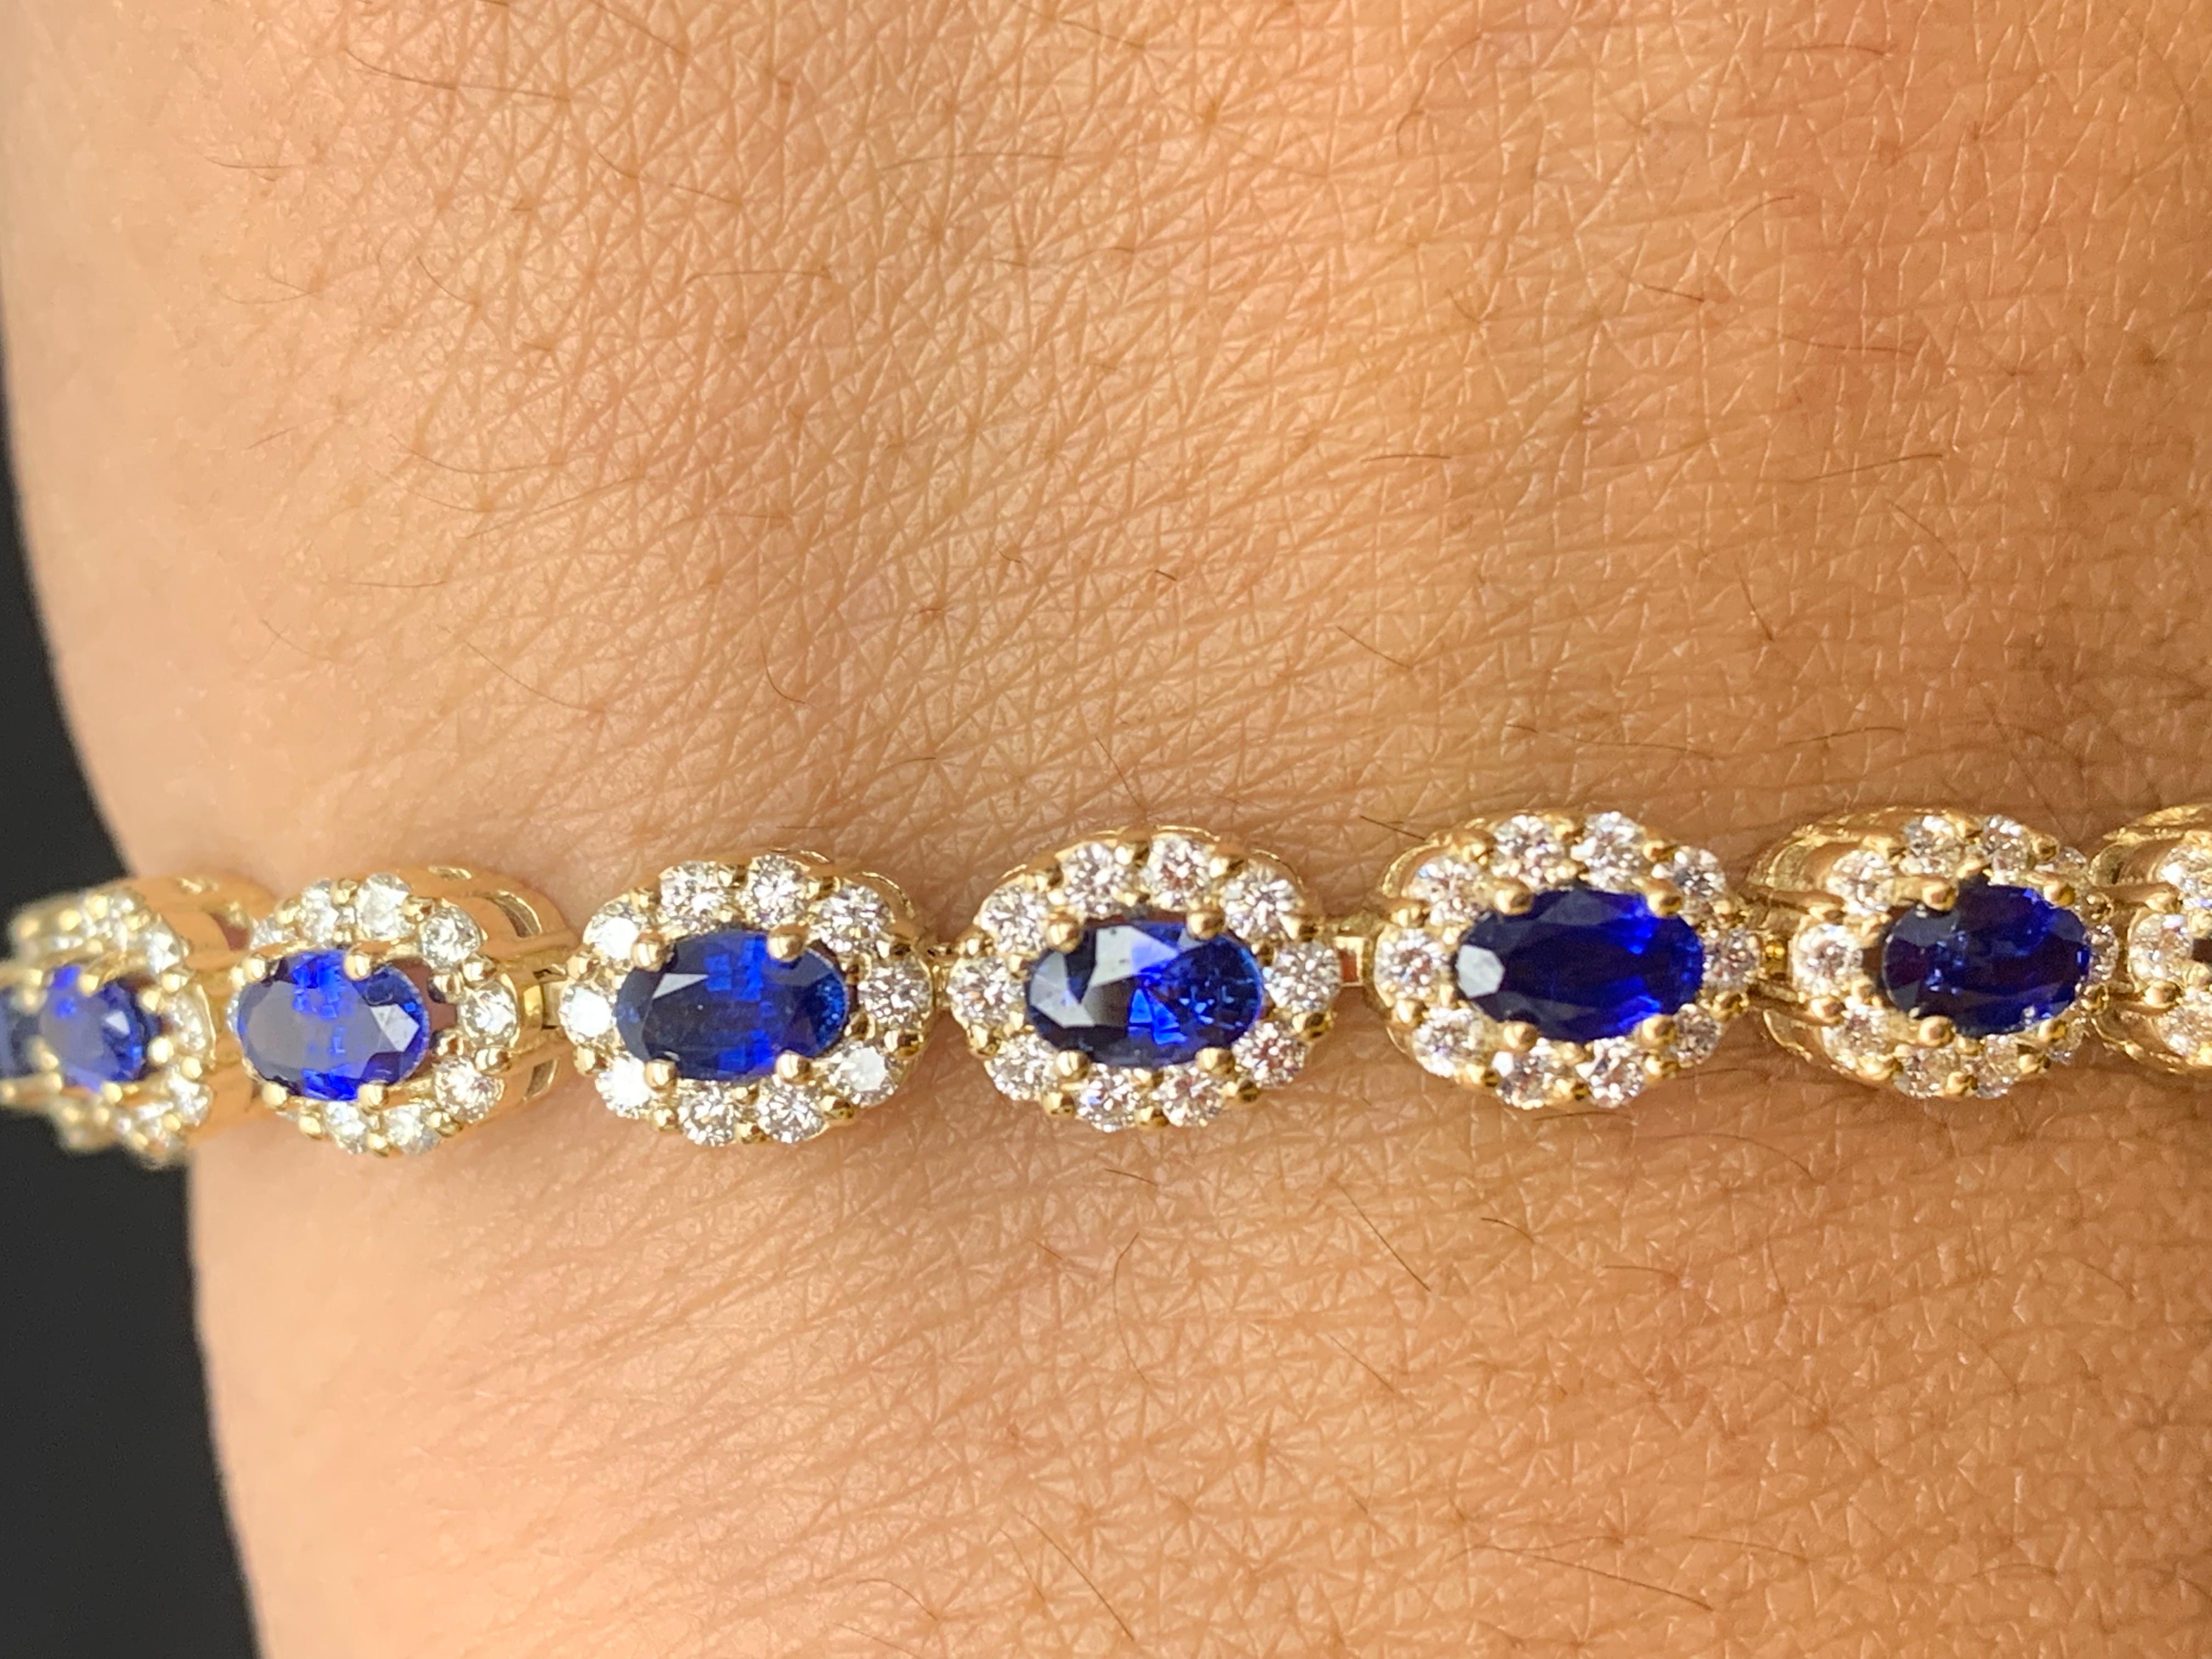 6.24 Carat Oval Cut Blue Sapphire and Diamond Halo Bracelet in 14K Yellow Gold For Sale 2